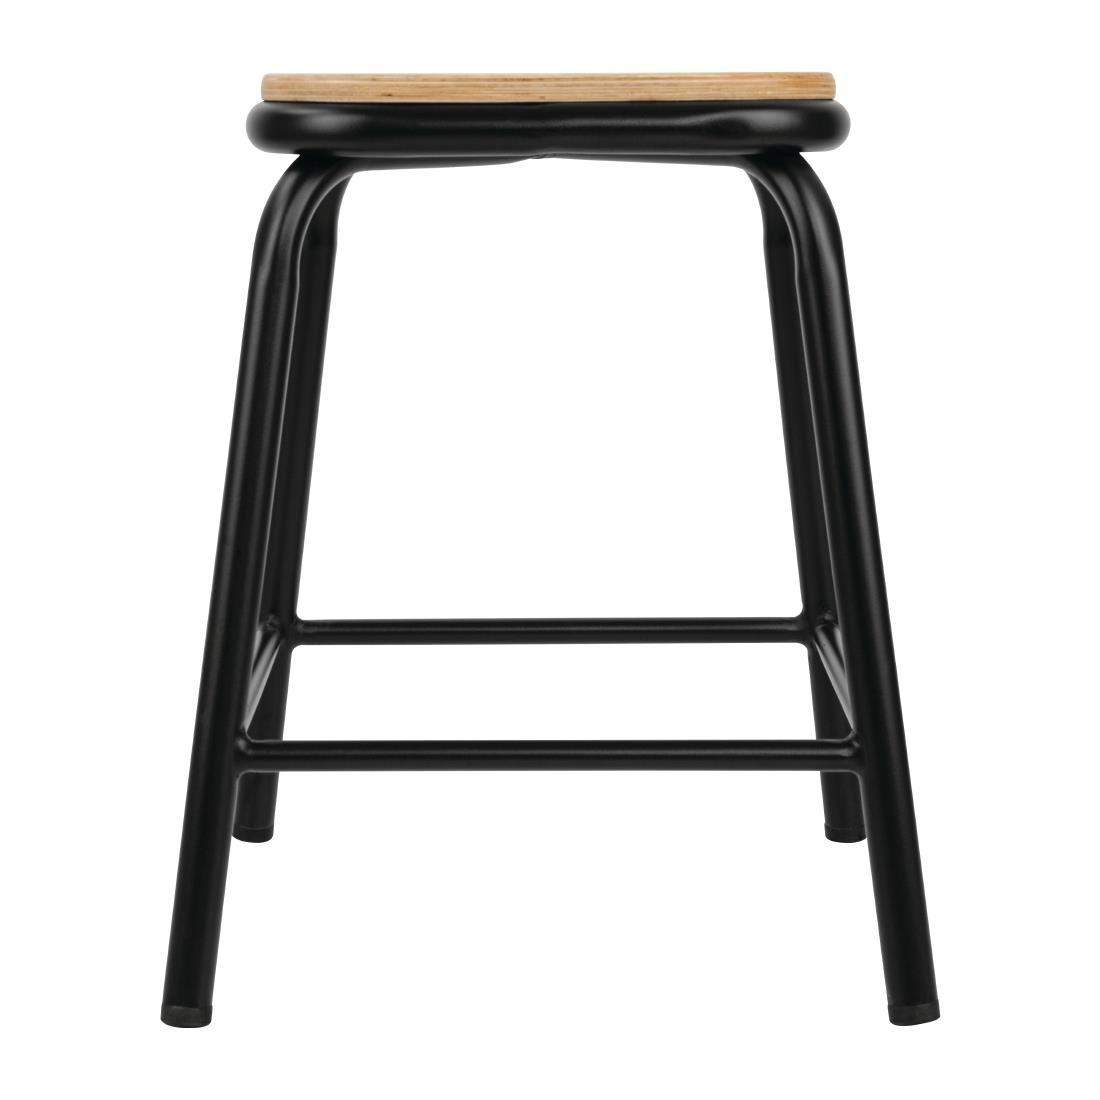 Bolero Cantina Low Stools with Wooden Seat Pad Black (Pack of 4) - DE481  - 4